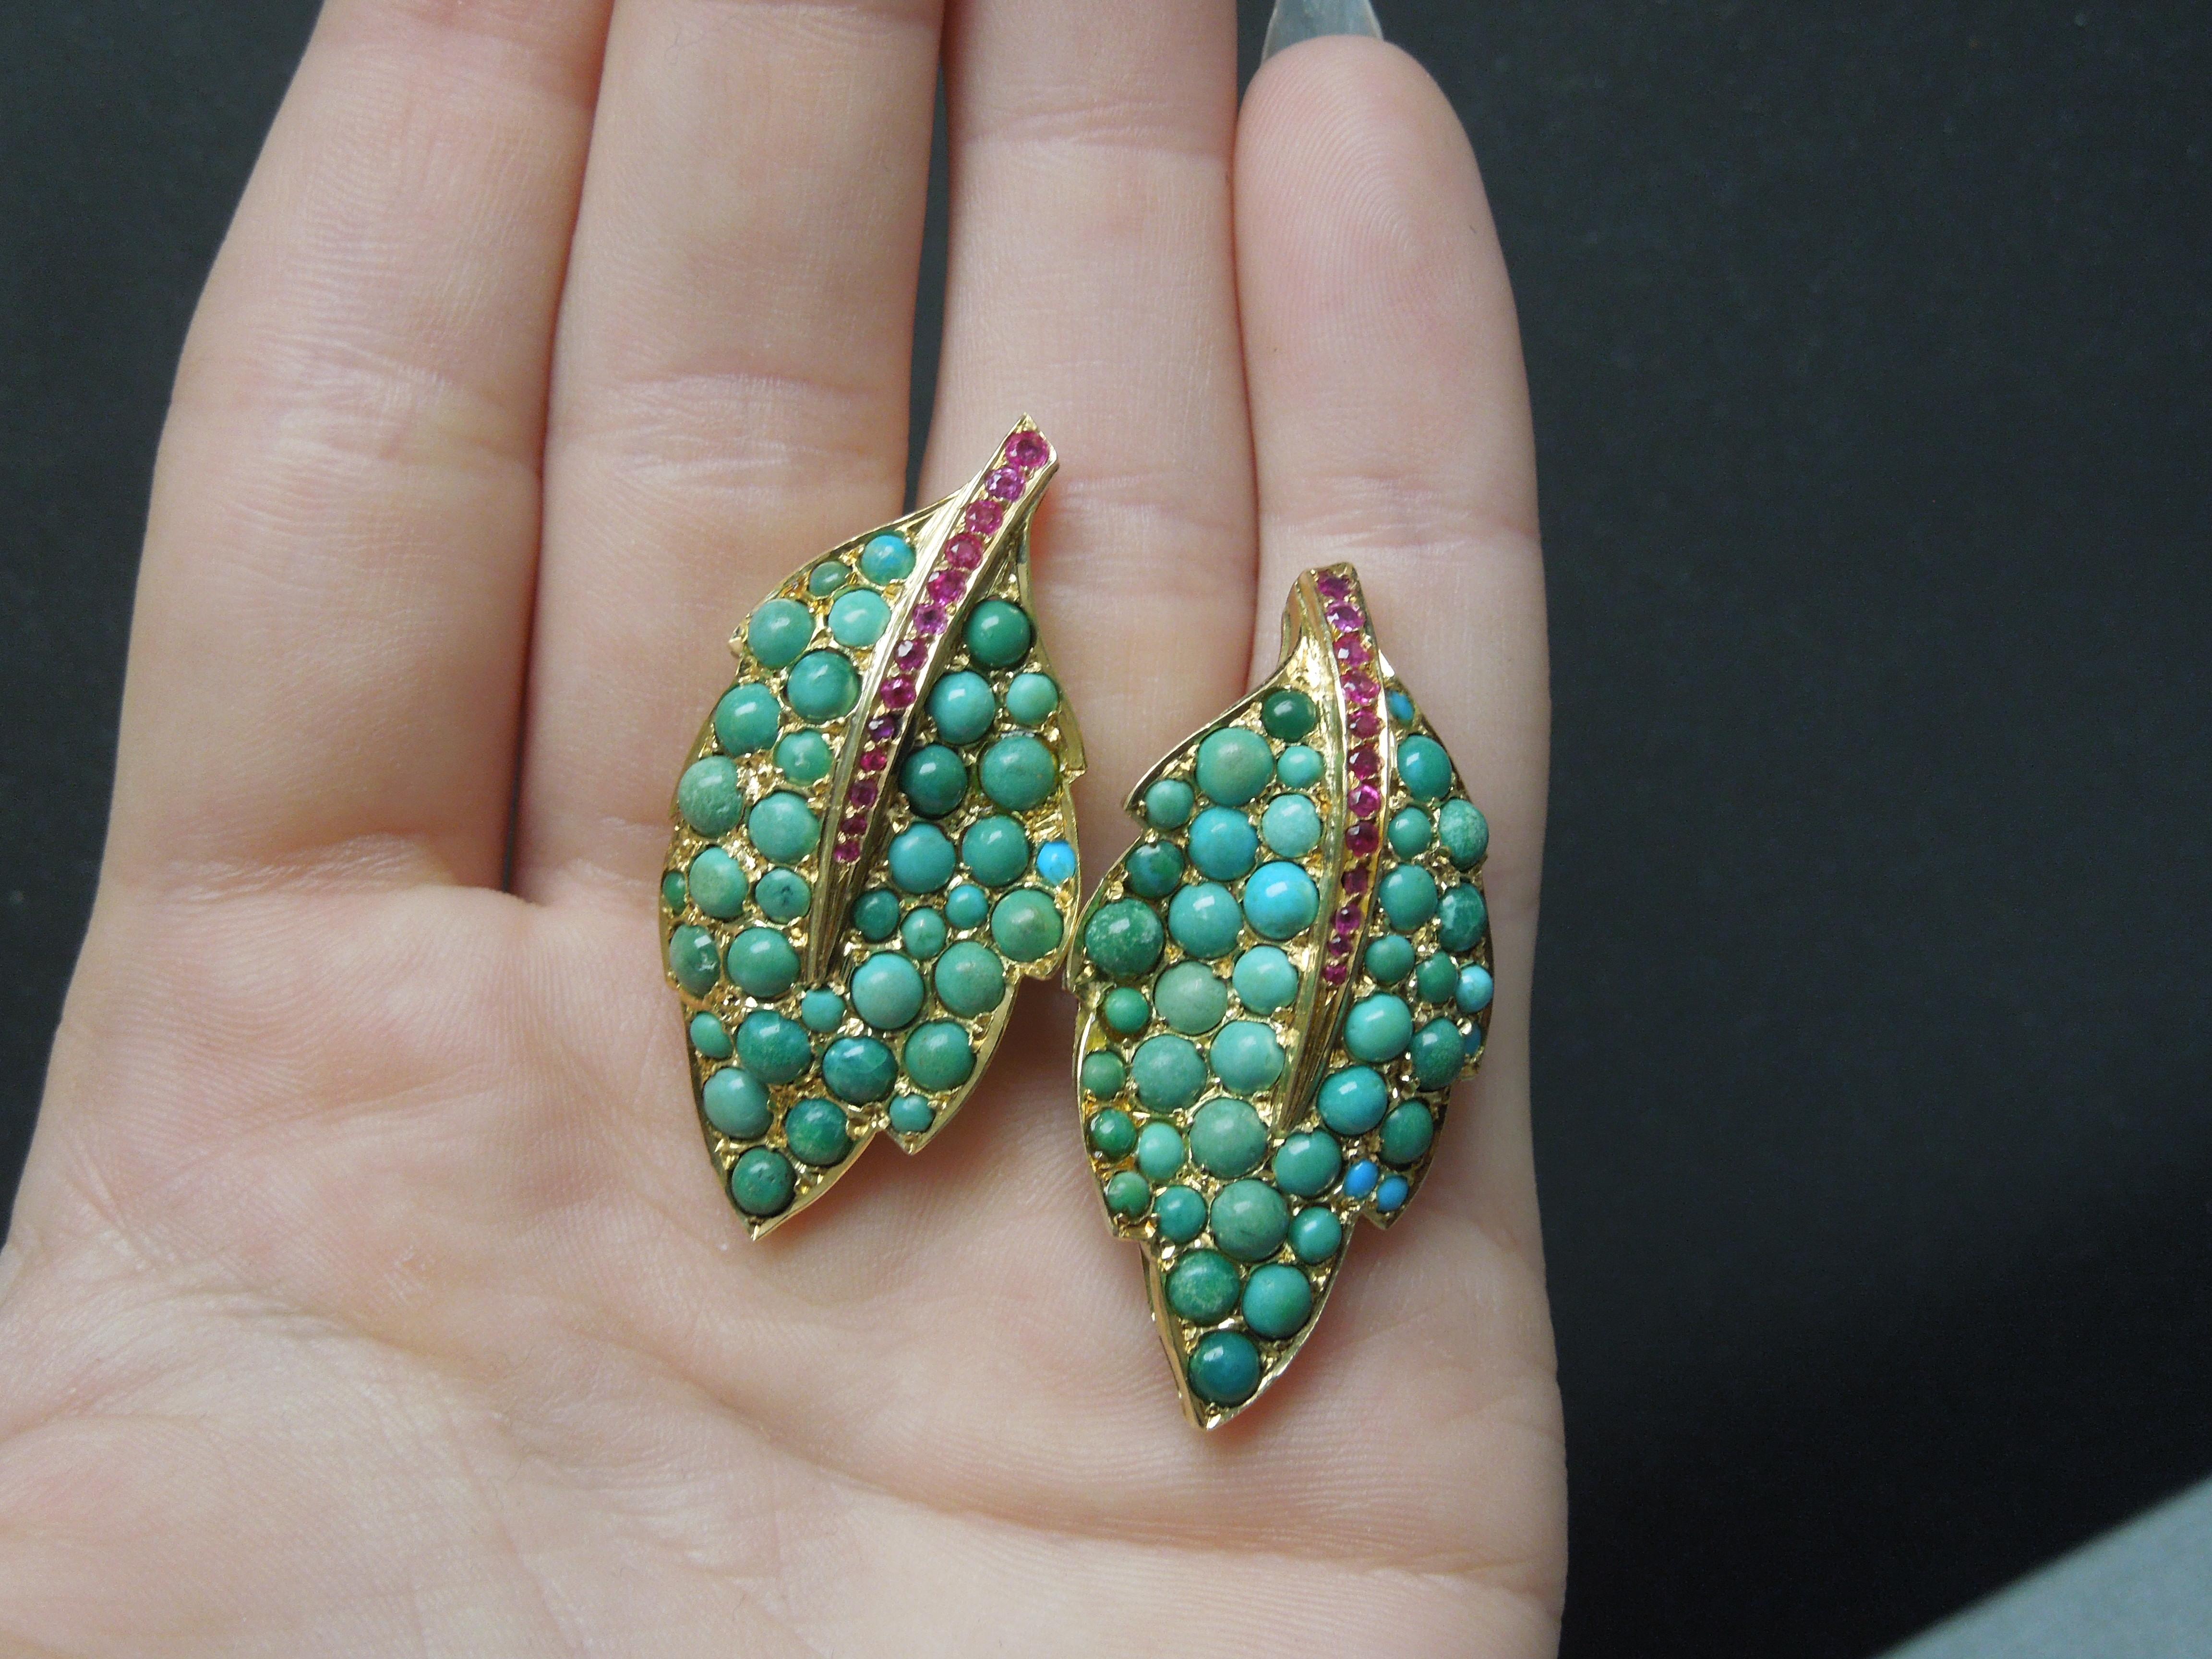 In an Ancient Roman design, attributed to the Roman wreath headdresses, these Antique Turquoise & Ruby Earrings are completely hand-tooled of 18 Karat Yellow Gold with both Hand Repousse & Bright-Cut tooling as well as beading. Featuring numerous